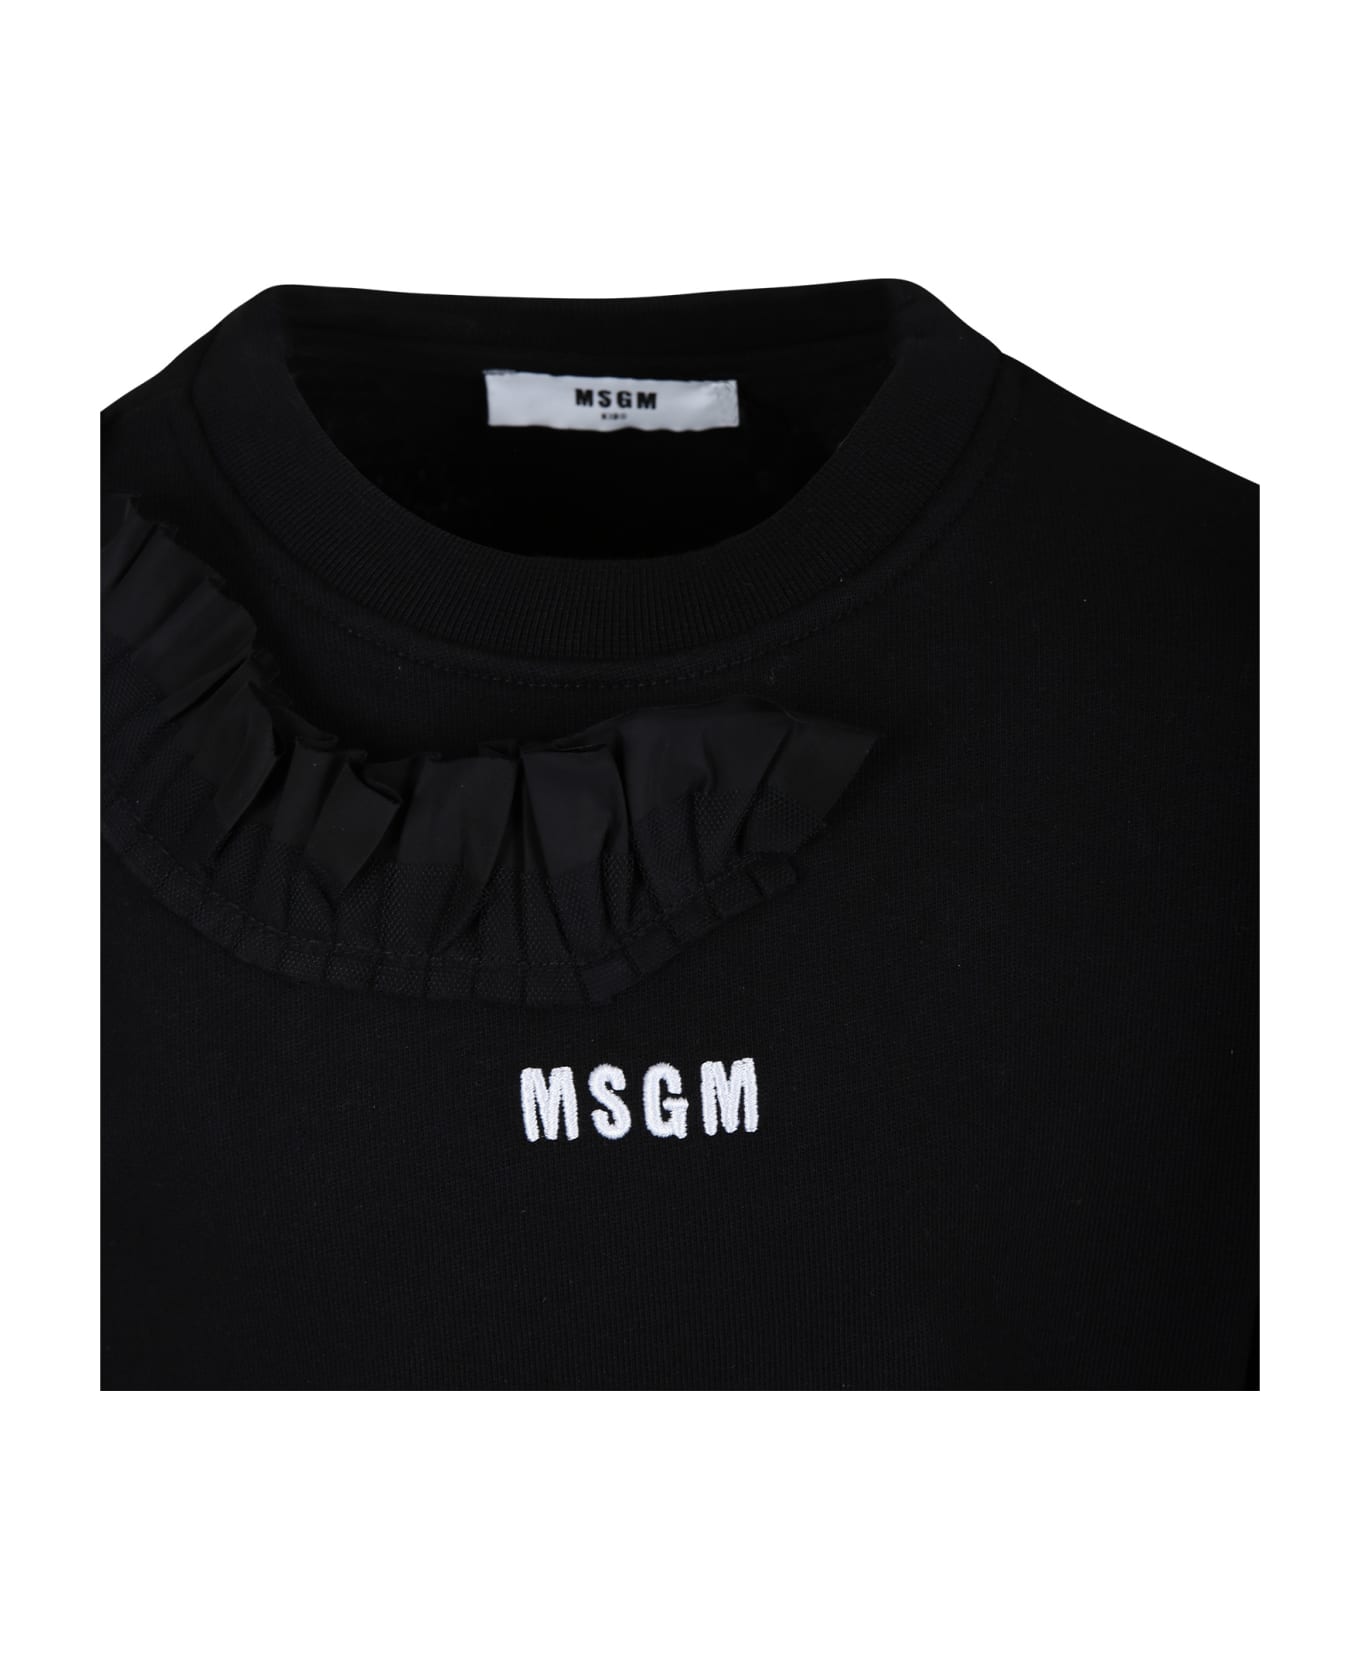 MSGM Black Dress For Girl With Ruffles And Logo - Black